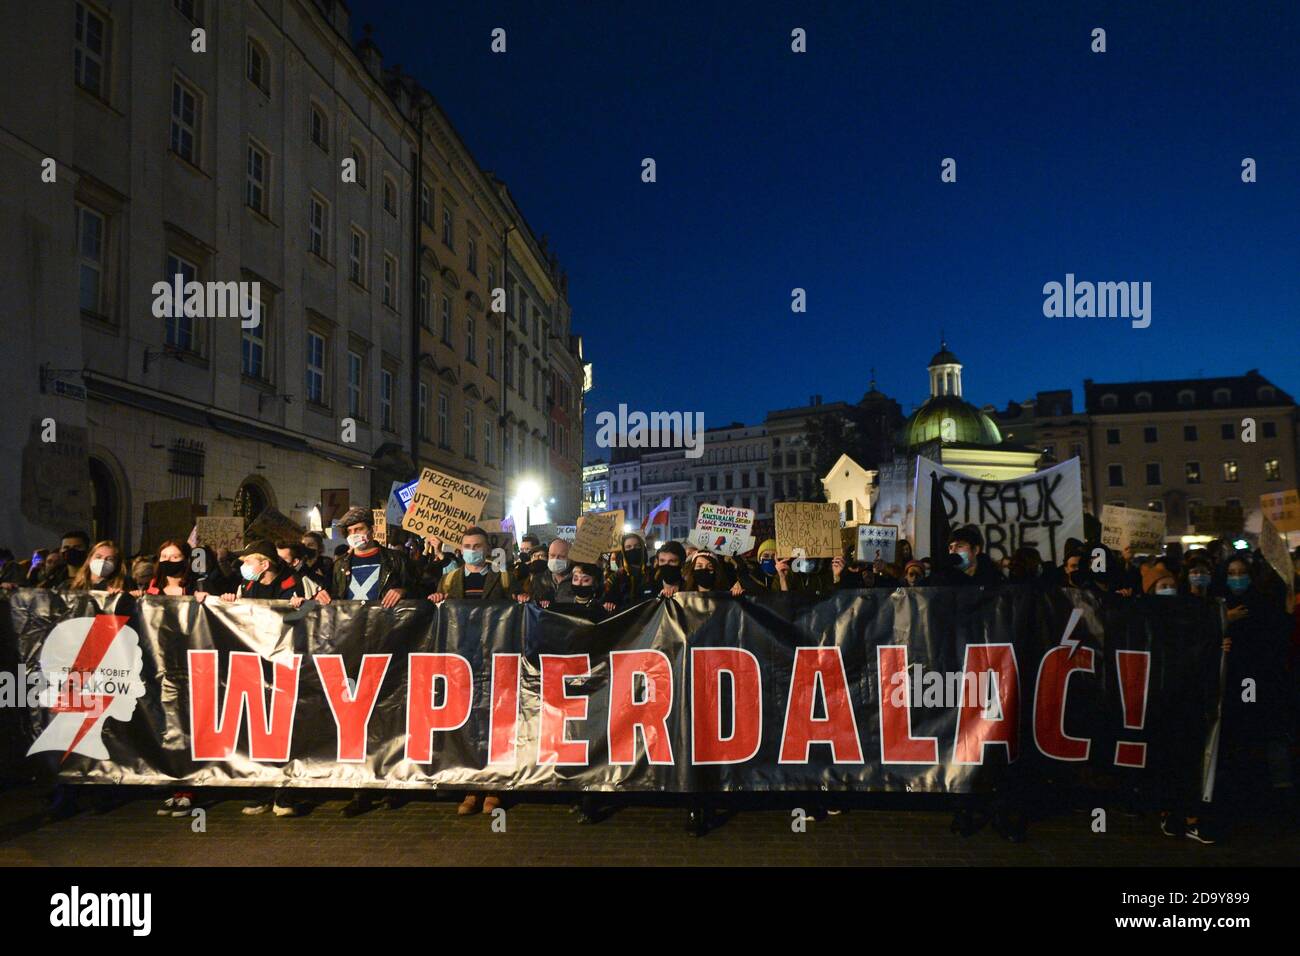 Krakow, Poland. 7 November, 2020.  Pro-Choice activists during another day of protests in Krakow's Old Town. Pro-Choice and women's rights activists and their supporters organised on Saturday evening another anti-government protest in Krakow to express their anger at the Supreme Court ruling in relation to abortion laws.. Credit: ASWphoto/Alamy Live News Stock Photo